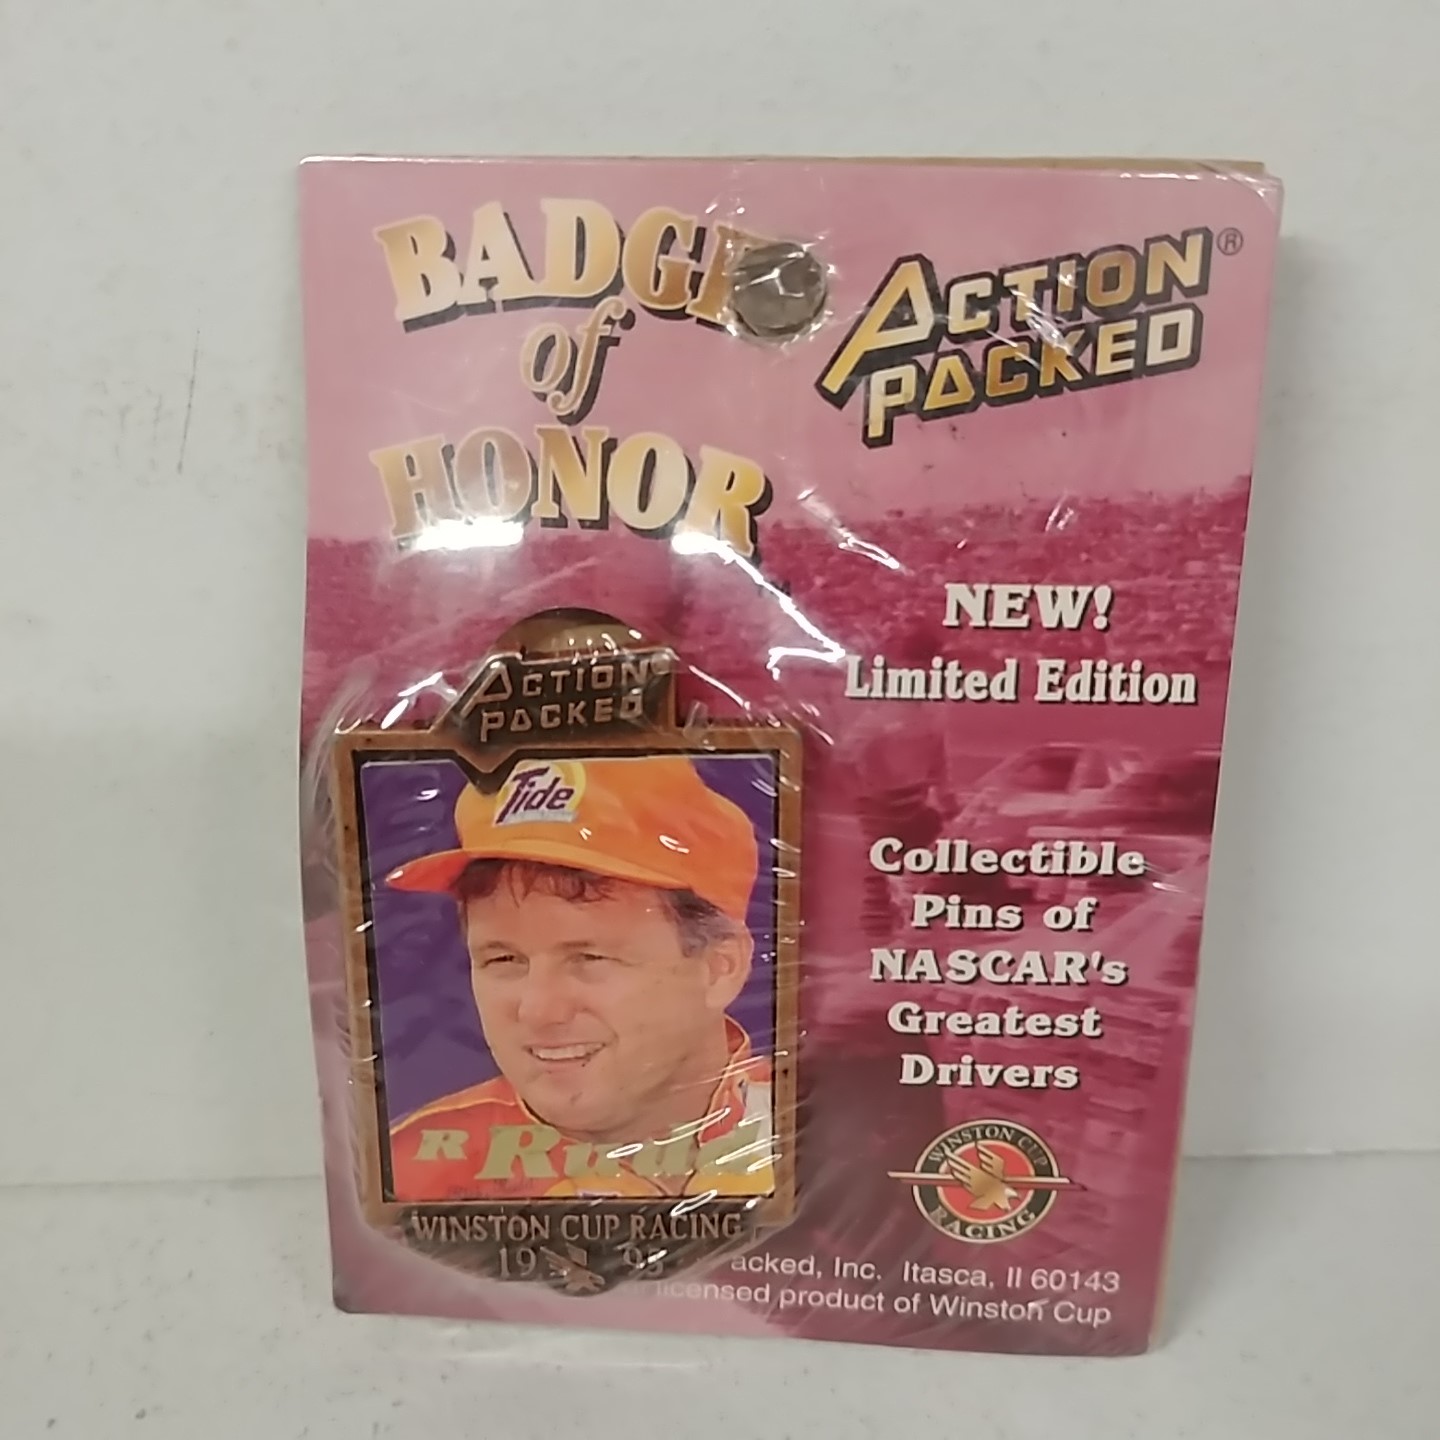 1995 Ricky Rudd Action Packed Badge of Honor pin